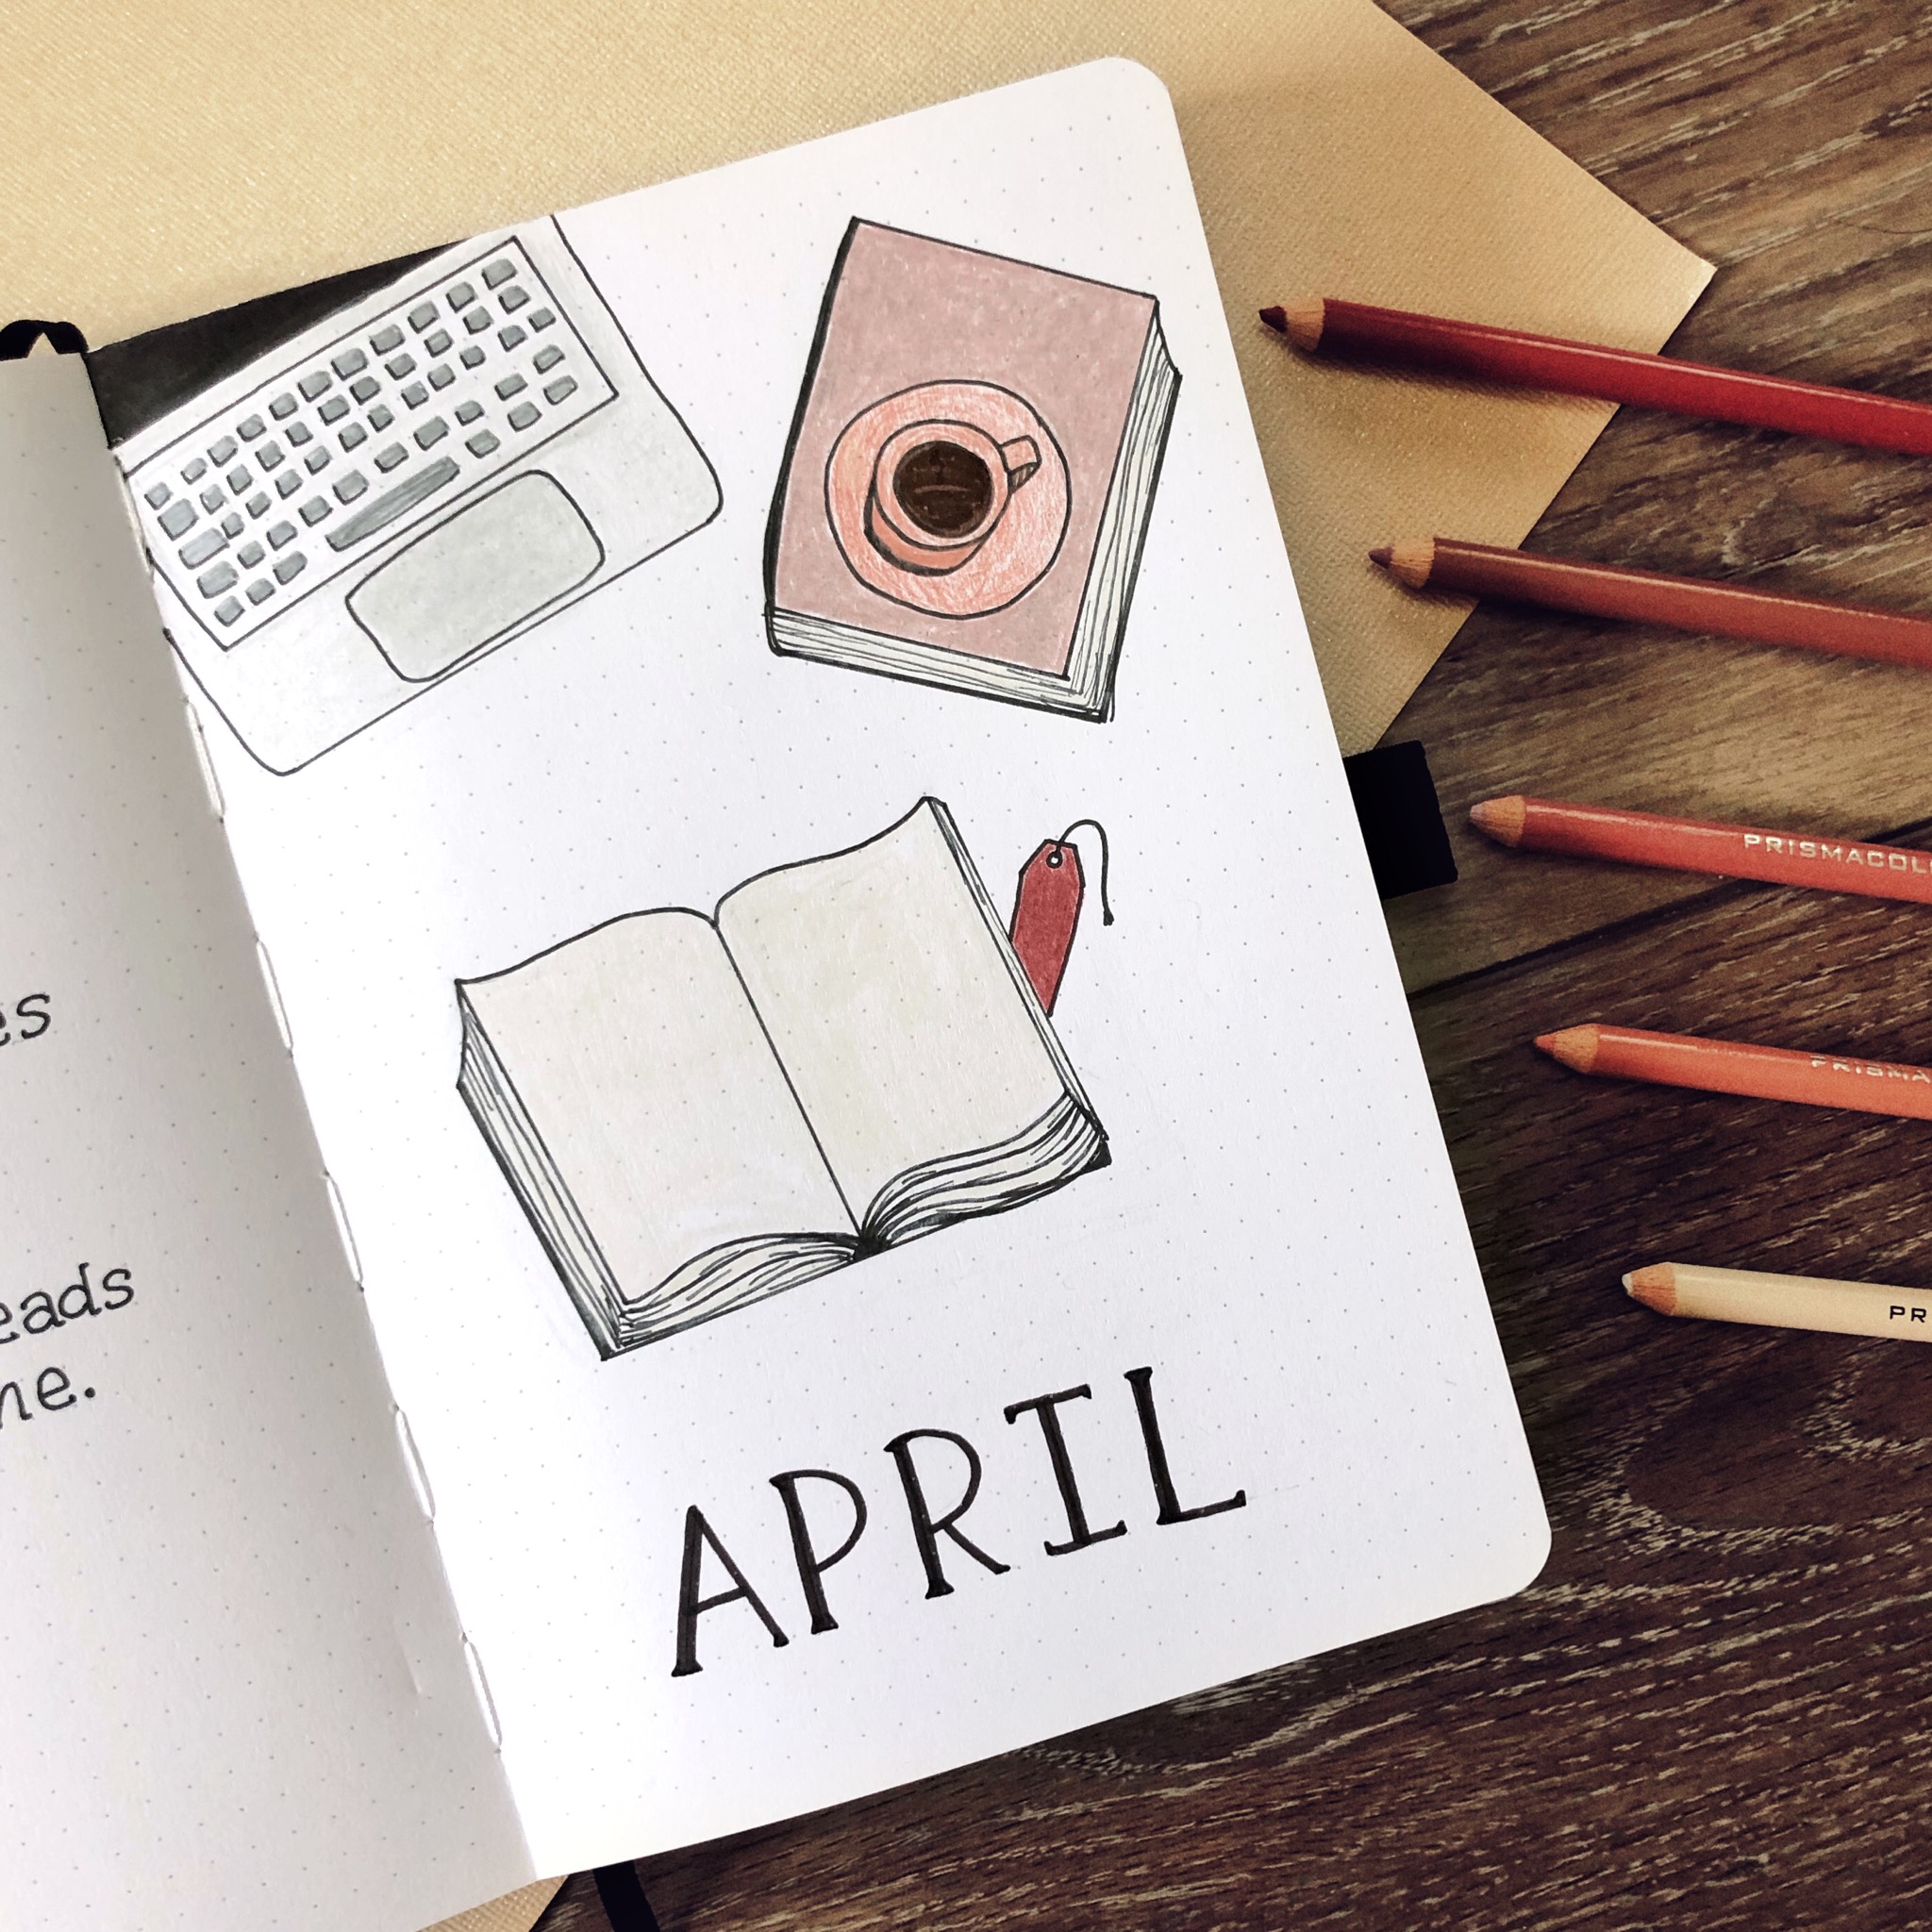 April Bullet Journal Inspiration - Rae's Daily Page